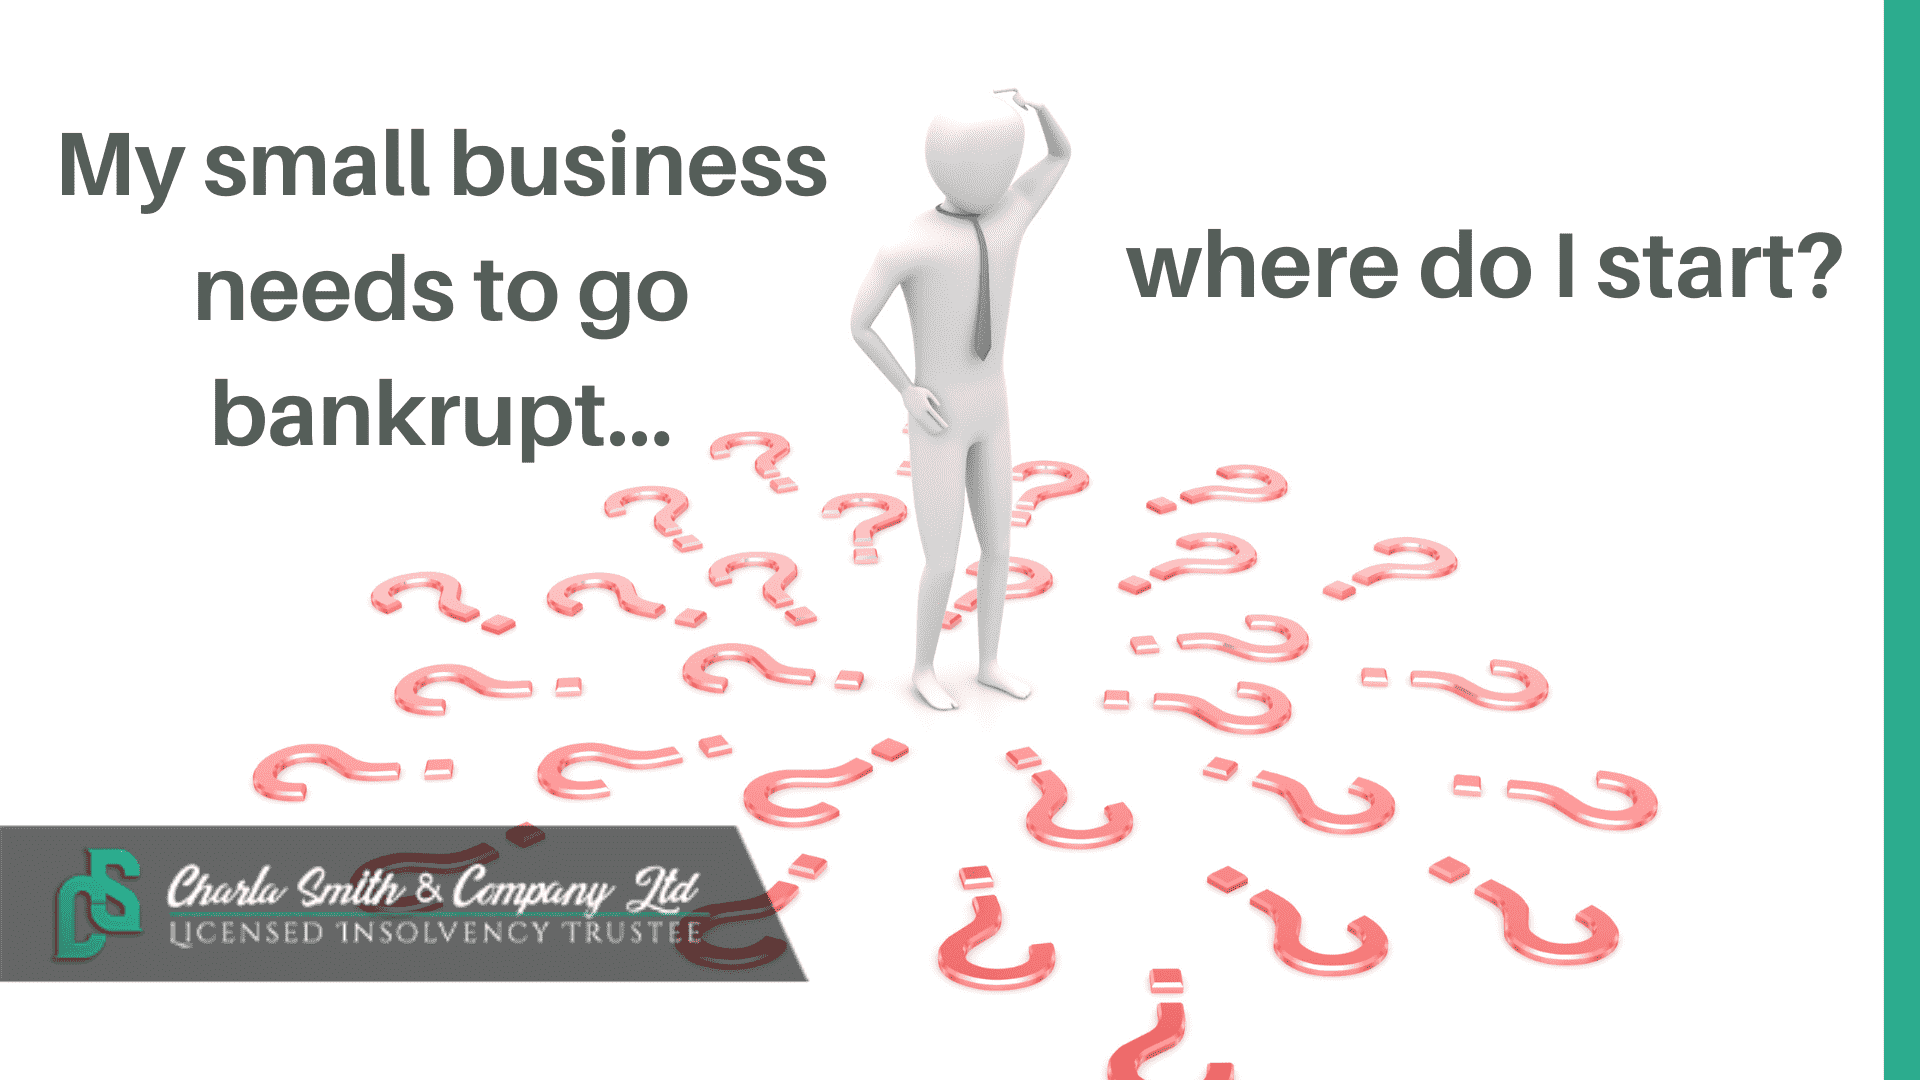 My small business needs to go bankrupt… where do I start?